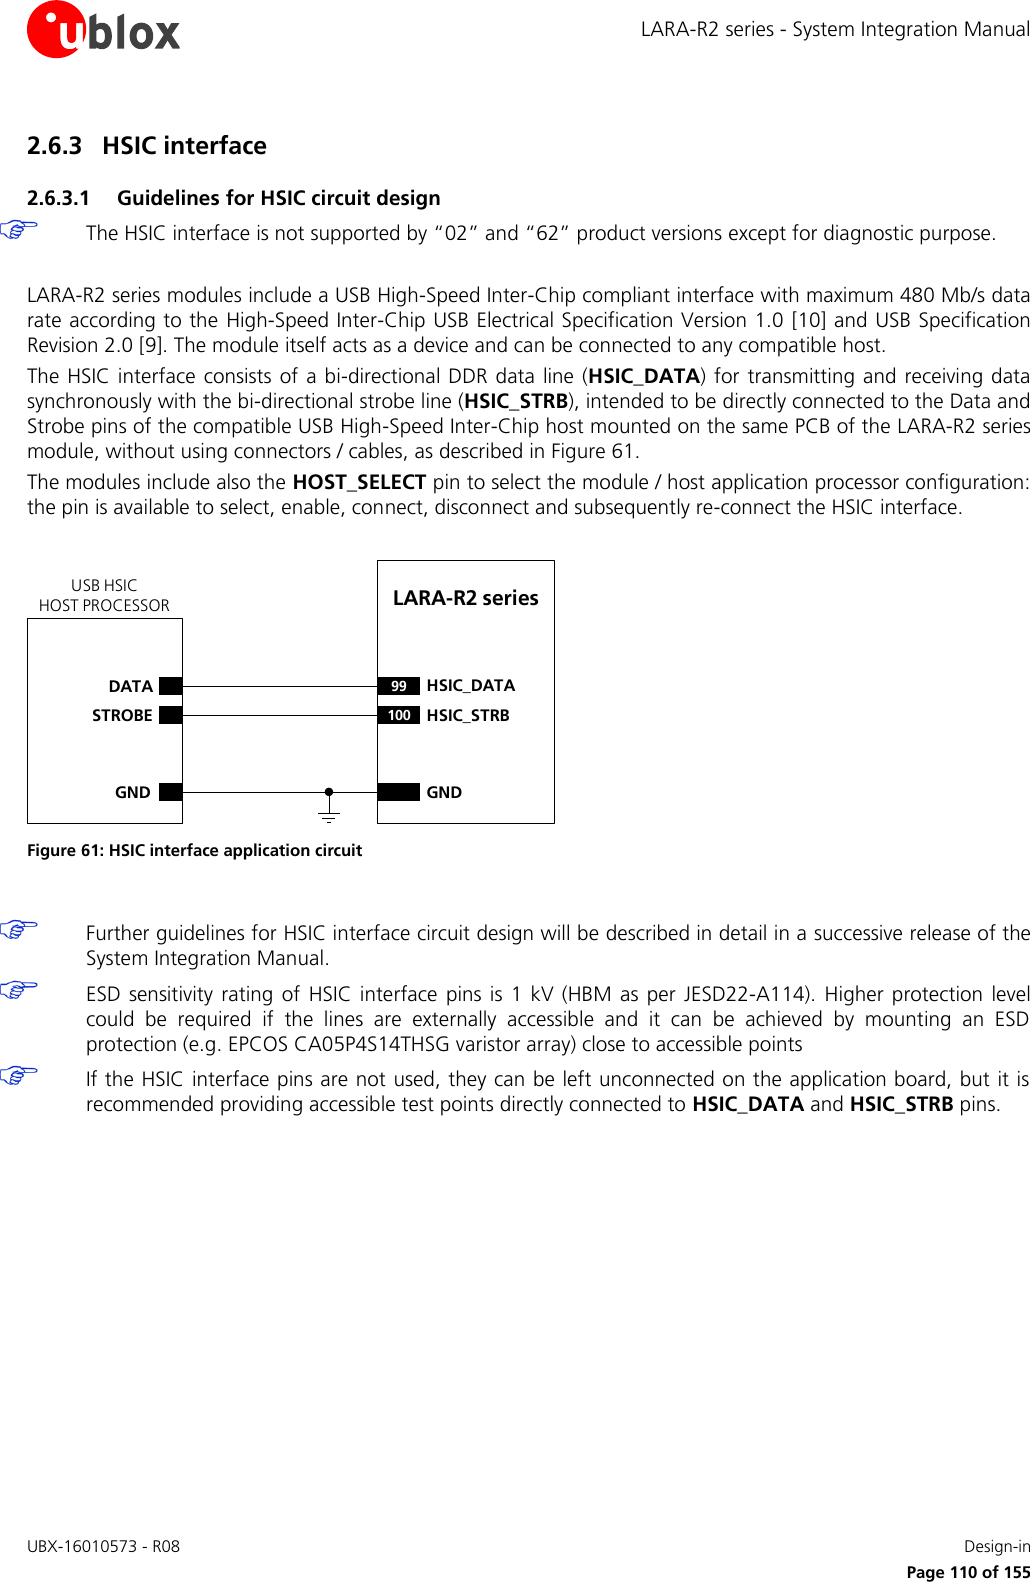 LARA-R2 series - System Integration Manual UBX-16010573 - R08    Design-in     Page 110 of 155 2.6.3 HSIC interface 2.6.3.1 Guidelines for HSIC circuit design  The HSIC interface is not supported by “02” and “62” product versions except for diagnostic purpose.  LARA-R2 series modules include a USB High-Speed Inter-Chip compliant interface with maximum 480 Mb/s data rate according to the High-Speed Inter-Chip USB Electrical Specification Version 1.0 [10] and USB Specification Revision 2.0 [9]. The module itself acts as a device and can be connected to any compatible host. The HSIC interface consists  of a bi-directional DDR data line (HSIC_DATA)  for transmitting  and receiving data synchronously with the bi-directional strobe line (HSIC_STRB), intended to be directly connected to the Data and Strobe pins of the compatible USB High-Speed Inter-Chip host mounted on the same PCB of the LARA-R2 series module, without using connectors / cables, as described in Figure 61. The modules include also the HOST_SELECT pin to select the module / host application processor configuration: the pin is available to select, enable, connect, disconnect and subsequently re-connect the HSIC interface.  LARA-R2 series DATASTROBEGND99 HSIC_DATA100 HSIC_STRBGNDUSB HSICHOST PROCESSOR Figure 61: HSIC interface application circuit   Further guidelines for HSIC interface circuit design will be described in detail in a successive release of the System Integration Manual.  ESD  sensitivity  rating  of  HSIC interface  pins is  1  kV  (HBM  as  per  JESD22-A114).  Higher  protection  level could  be  required  if  the  lines  are  externally  accessible  and  it  can  be  achieved  by  mounting  an  ESD protection (e.g. EPCOS CA05P4S14THSG varistor array) close to accessible points  If the HSIC interface pins are not used, they can be left unconnected on the application board, but it is recommended providing accessible test points directly connected to HSIC_DATA and HSIC_STRB pins.  